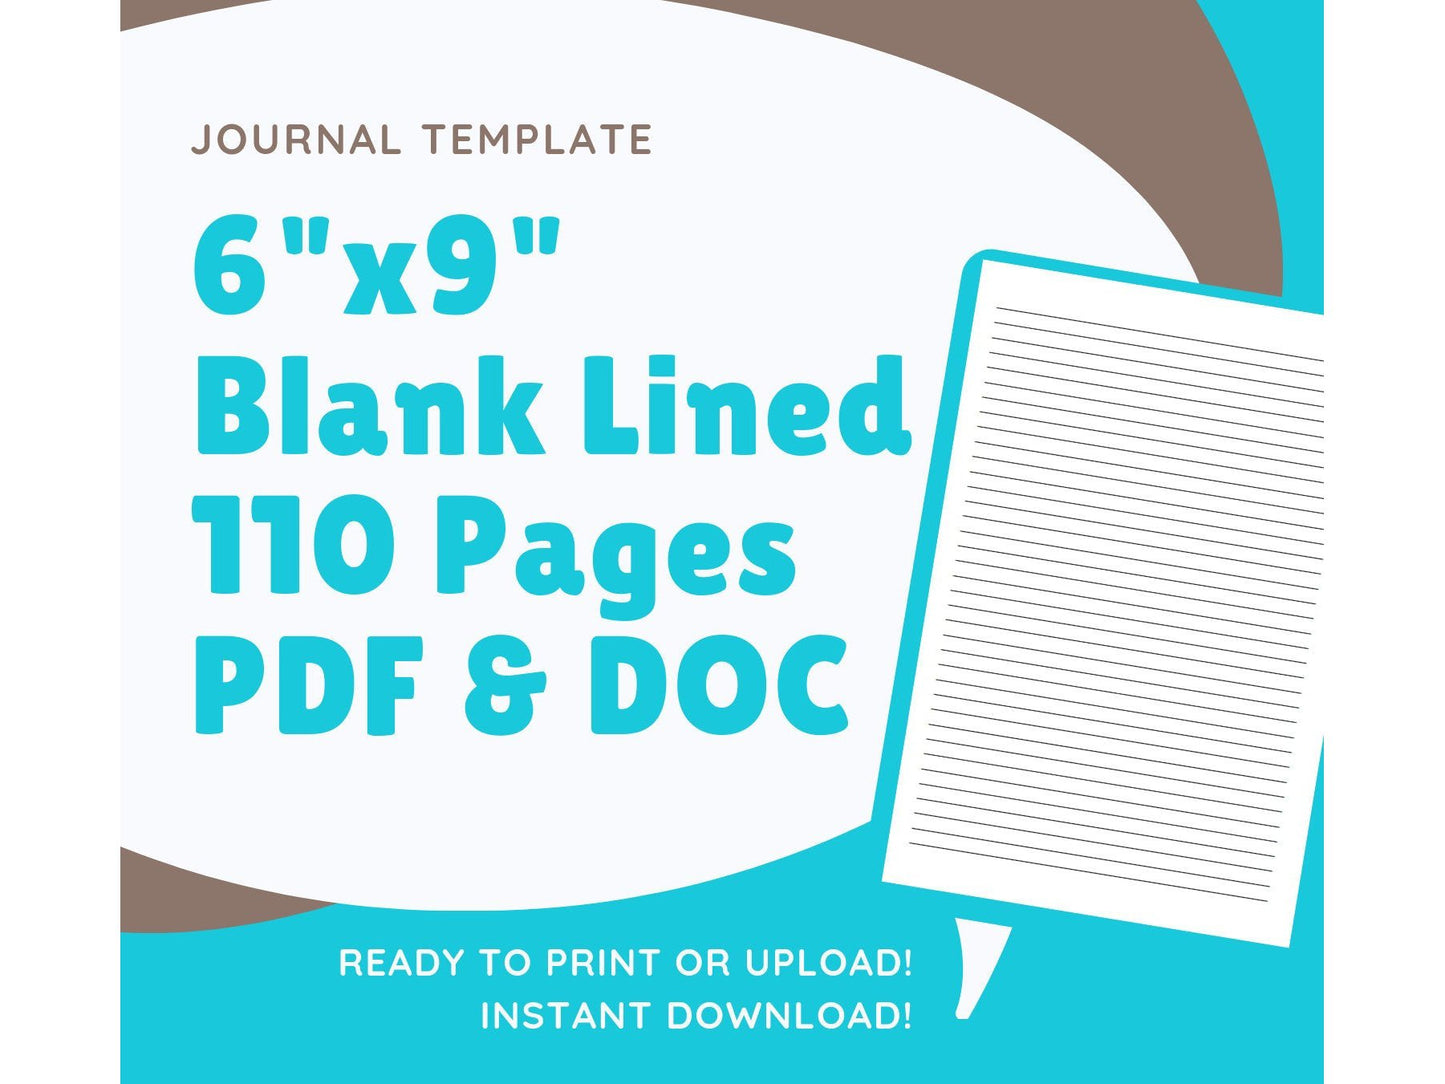 KDP Kindle Direct Publishing Ready To Upload Blank Journal Template 6"x9"